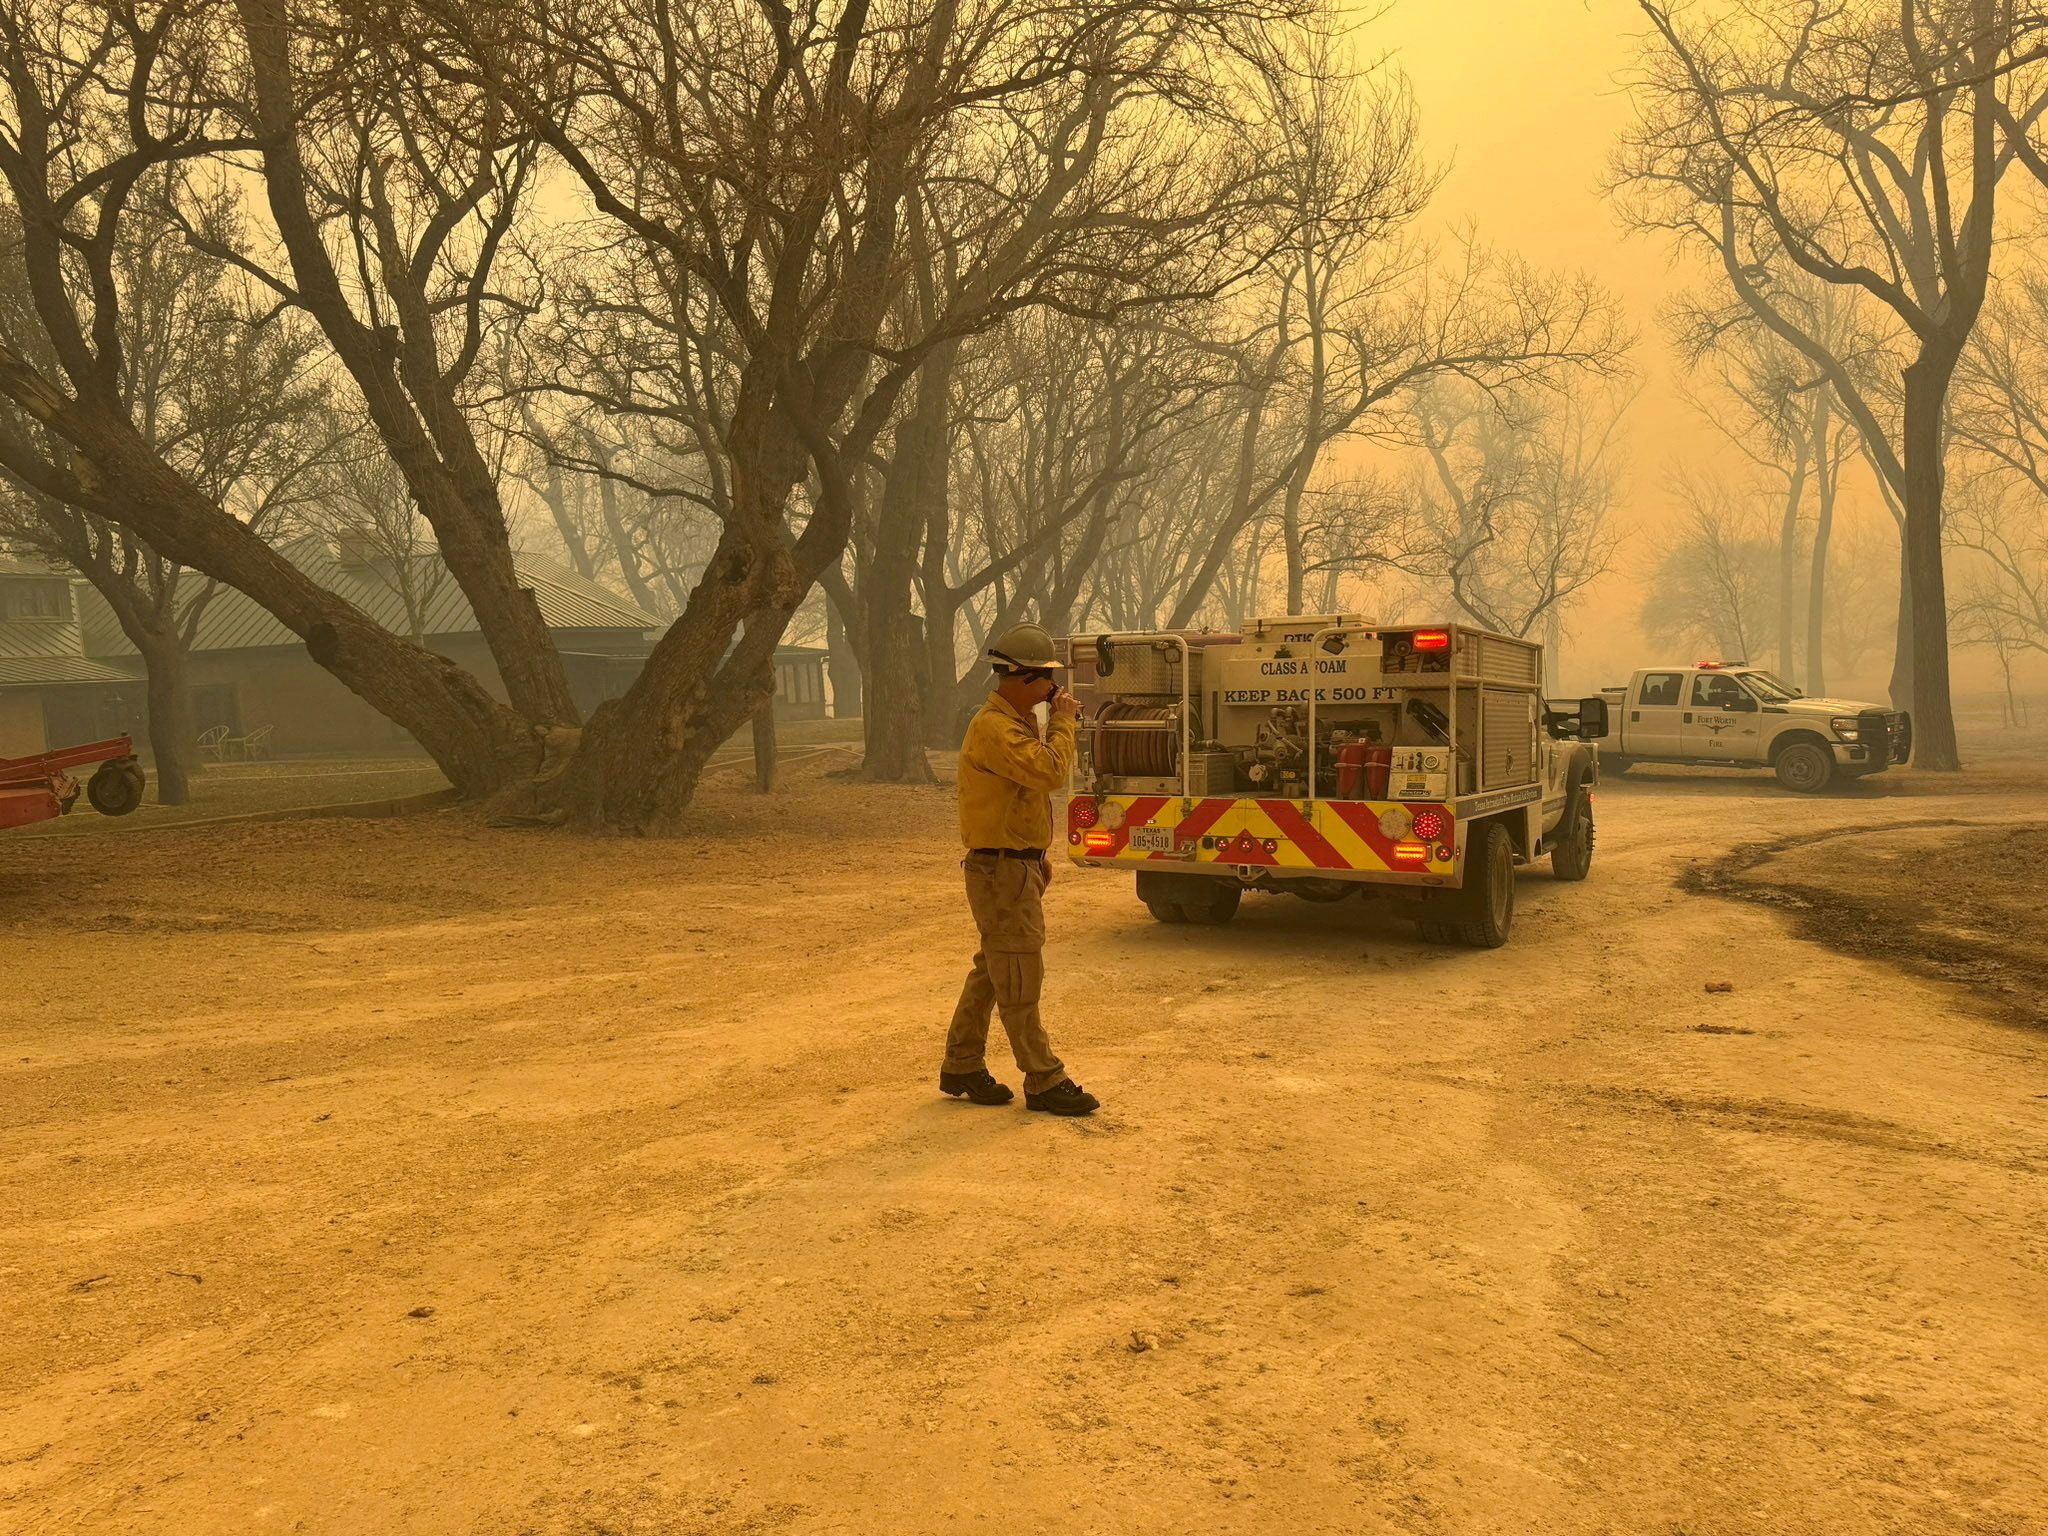 Wildland Team members depart to operate amid the spread of fire in Panhandle, Texas